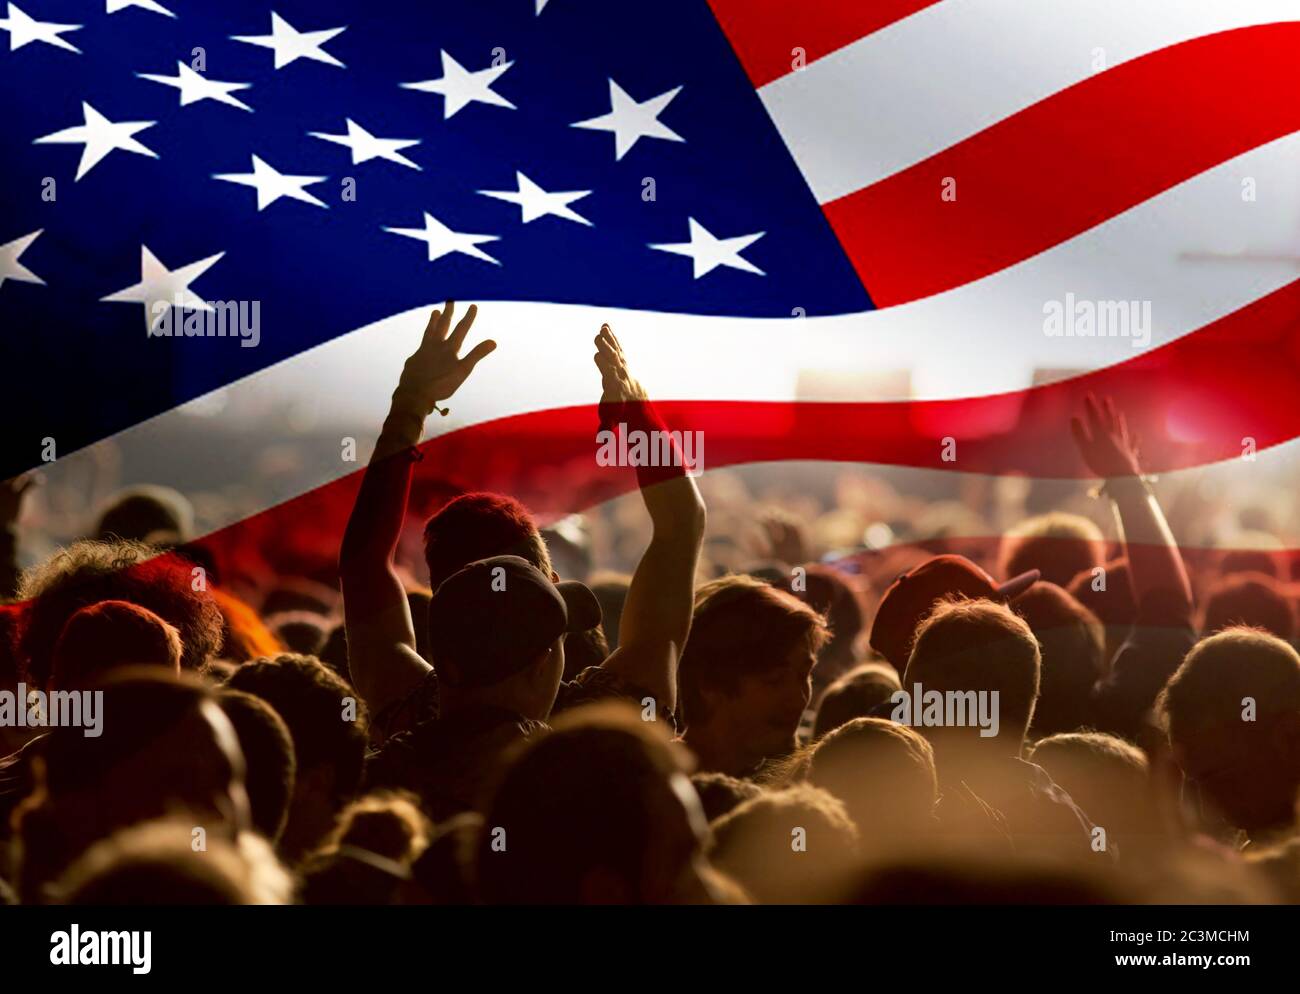 crowd celebrating Independence Day. United States of America USA flag with fireworks background for 4th of July Stock Photo